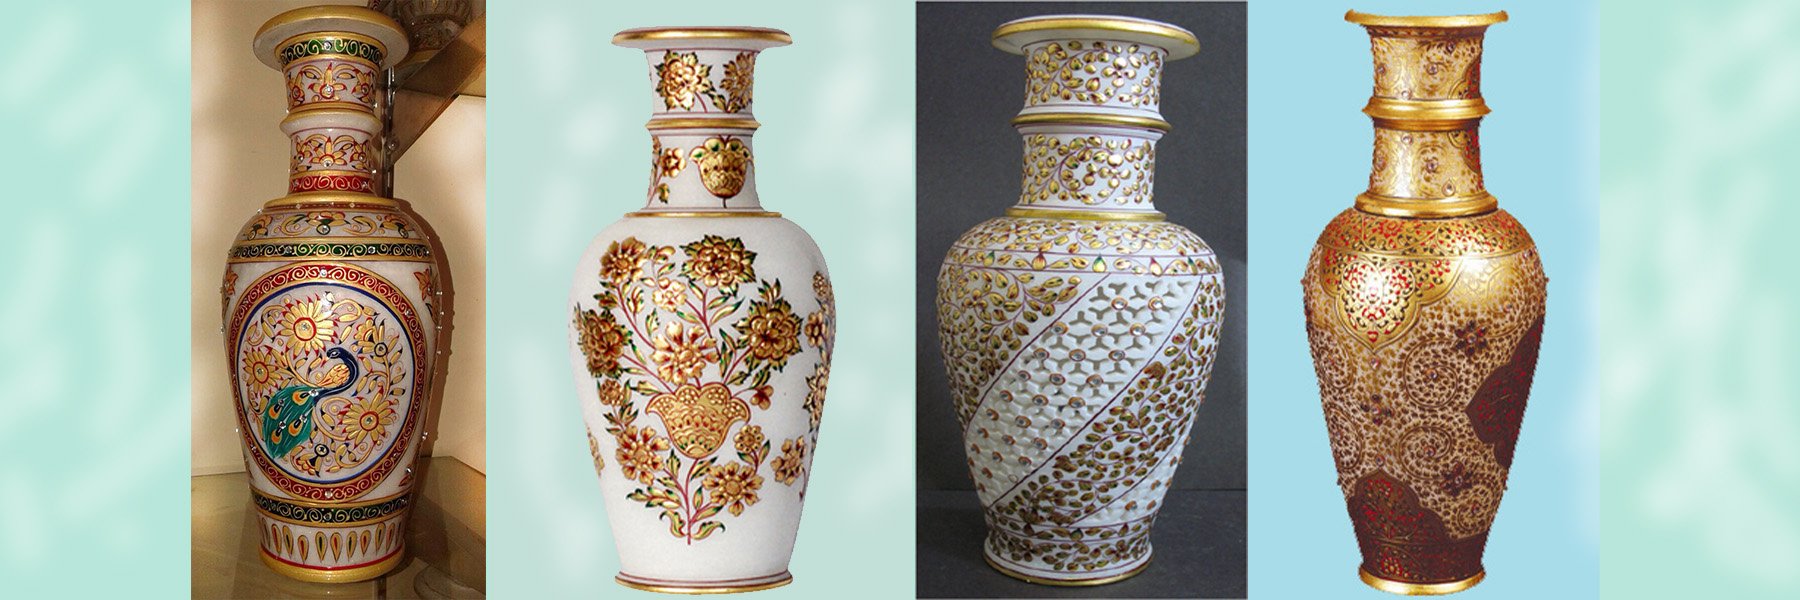 Marble Vases From Rajasthan, India